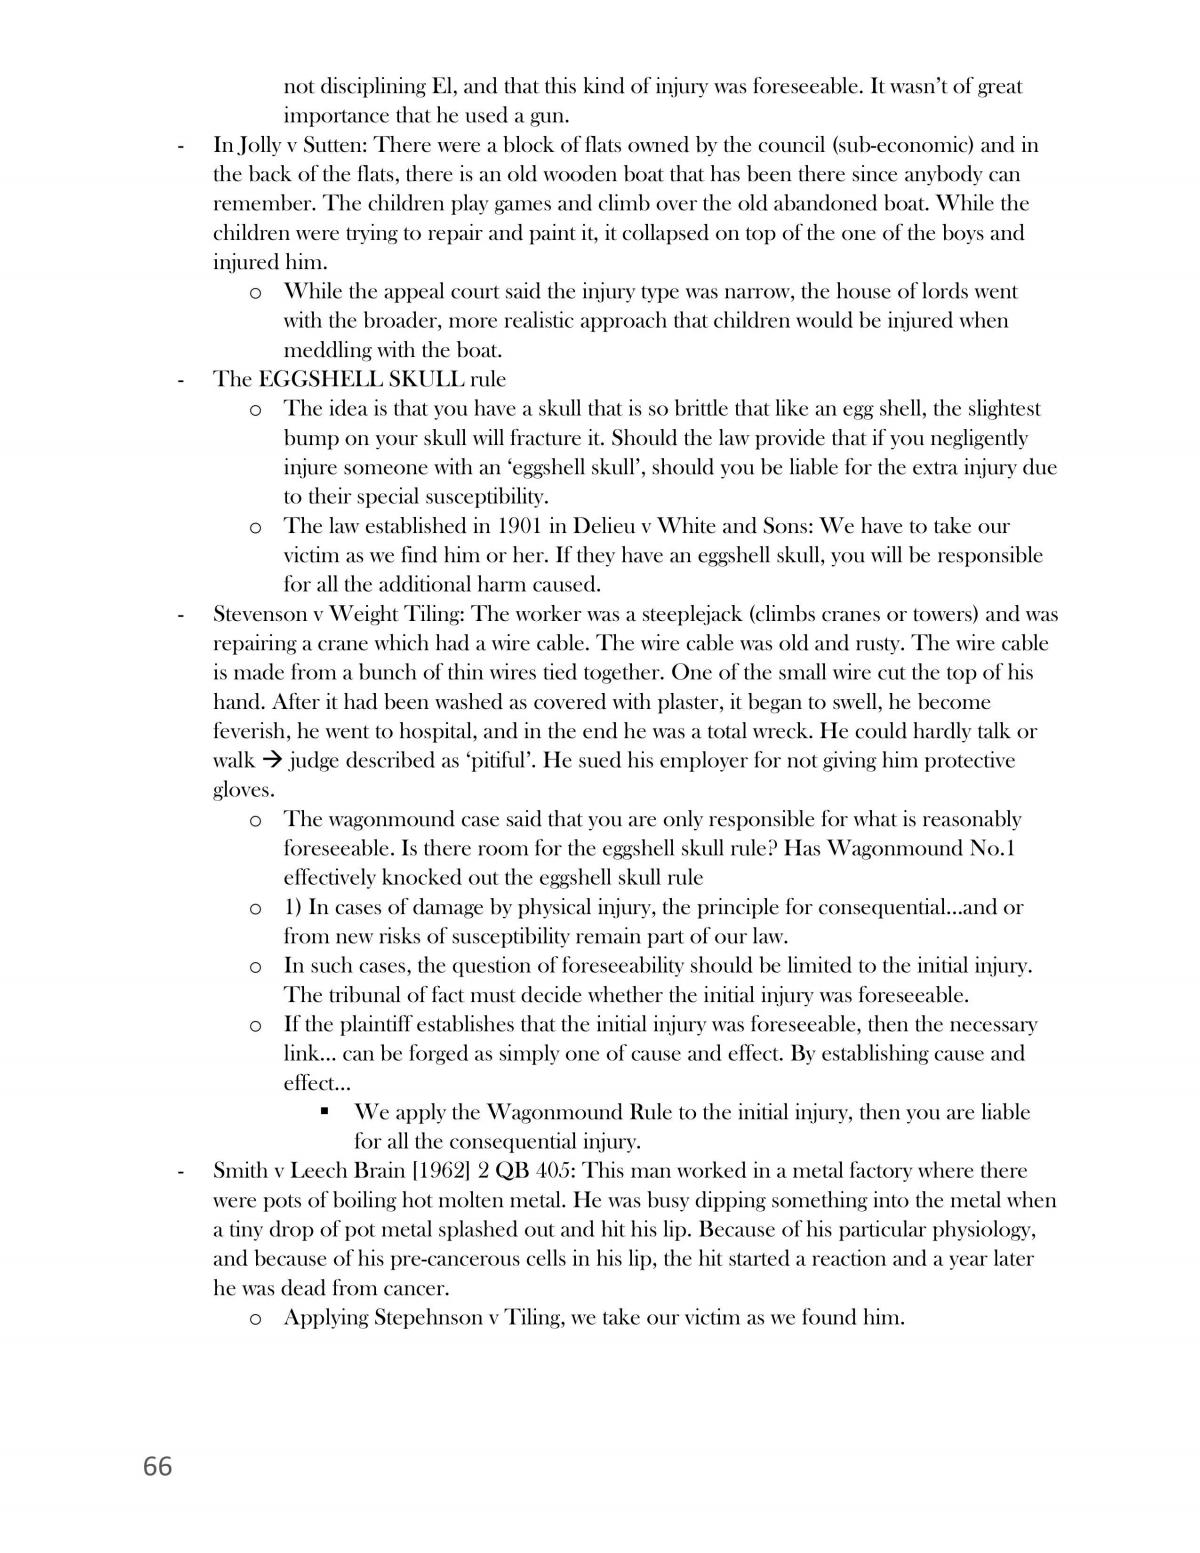 Complete Lecture and Study Notes - Page 66